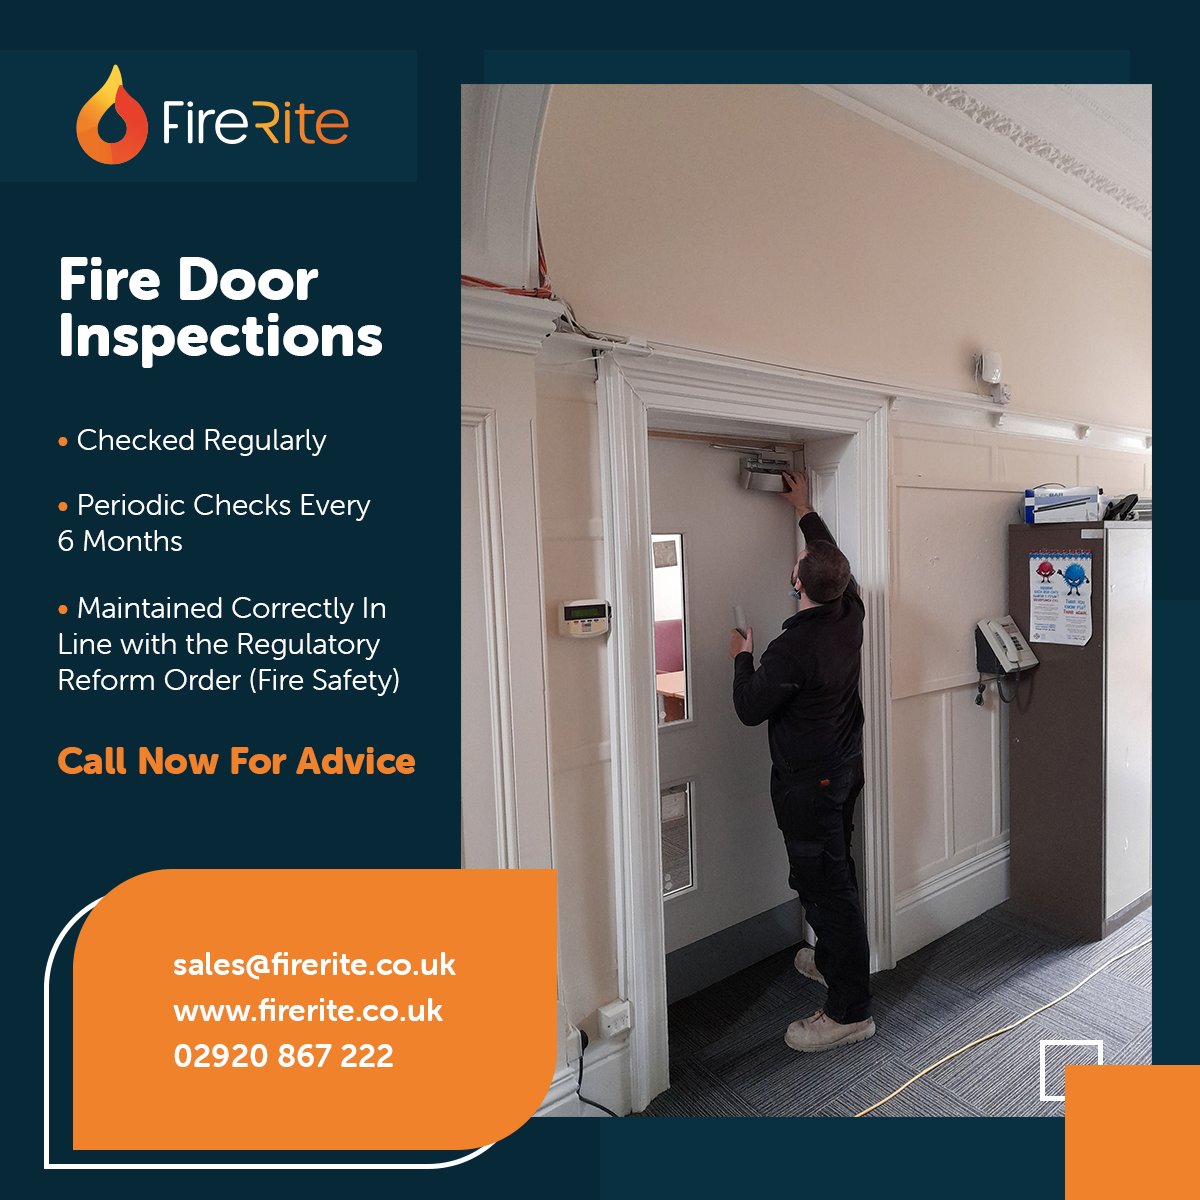 Fire Door Inspections

If you are looking for advice regarding these and other passive fire protection, then get in touch.

firerite.co.uk

#firedoor #firedoorchecks #passivefireprotection #firesafety #bafe #firas